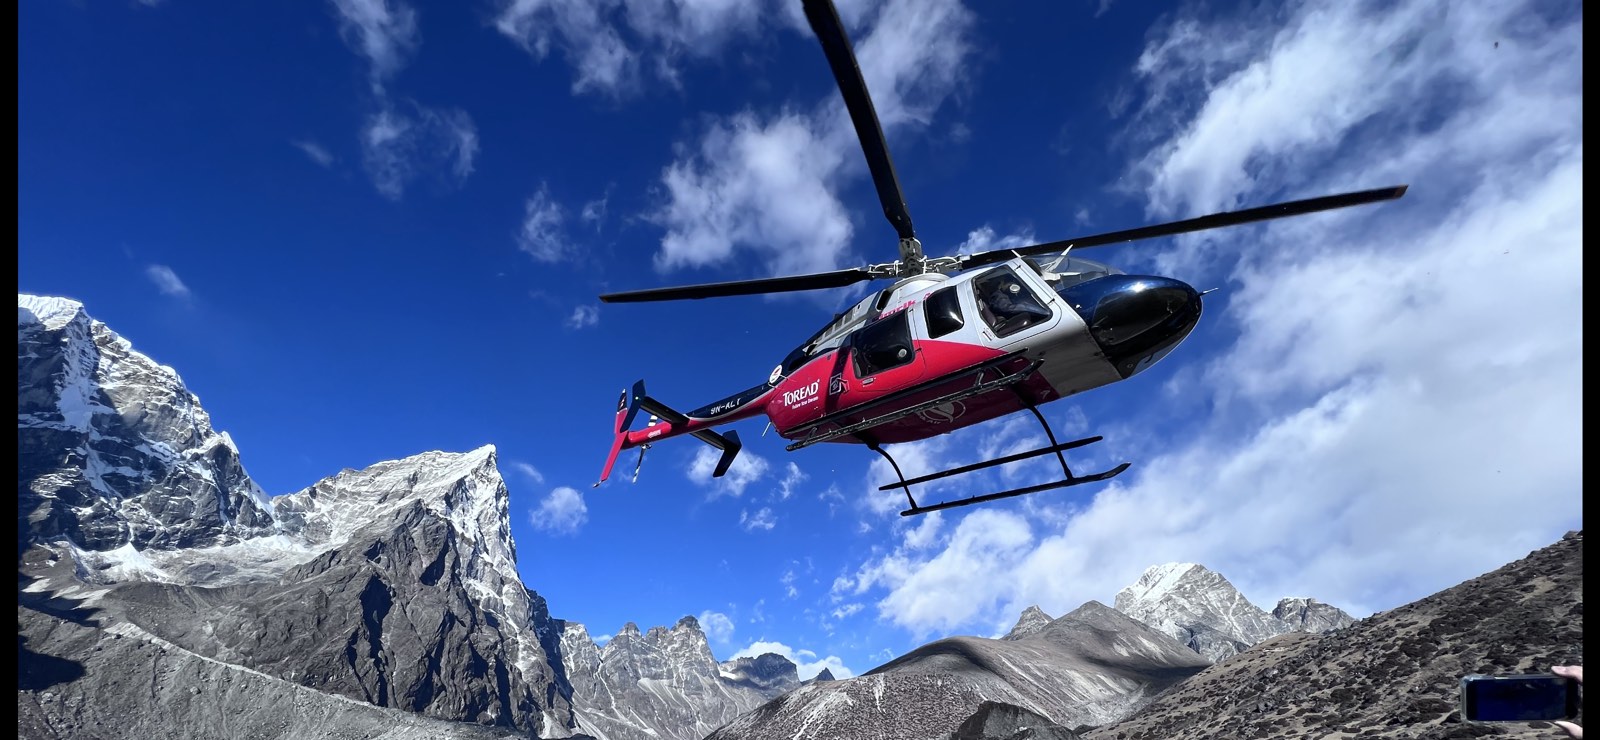 Reaching New Heights: A breathtaking view of a helicopter soaring near Mount Everest 